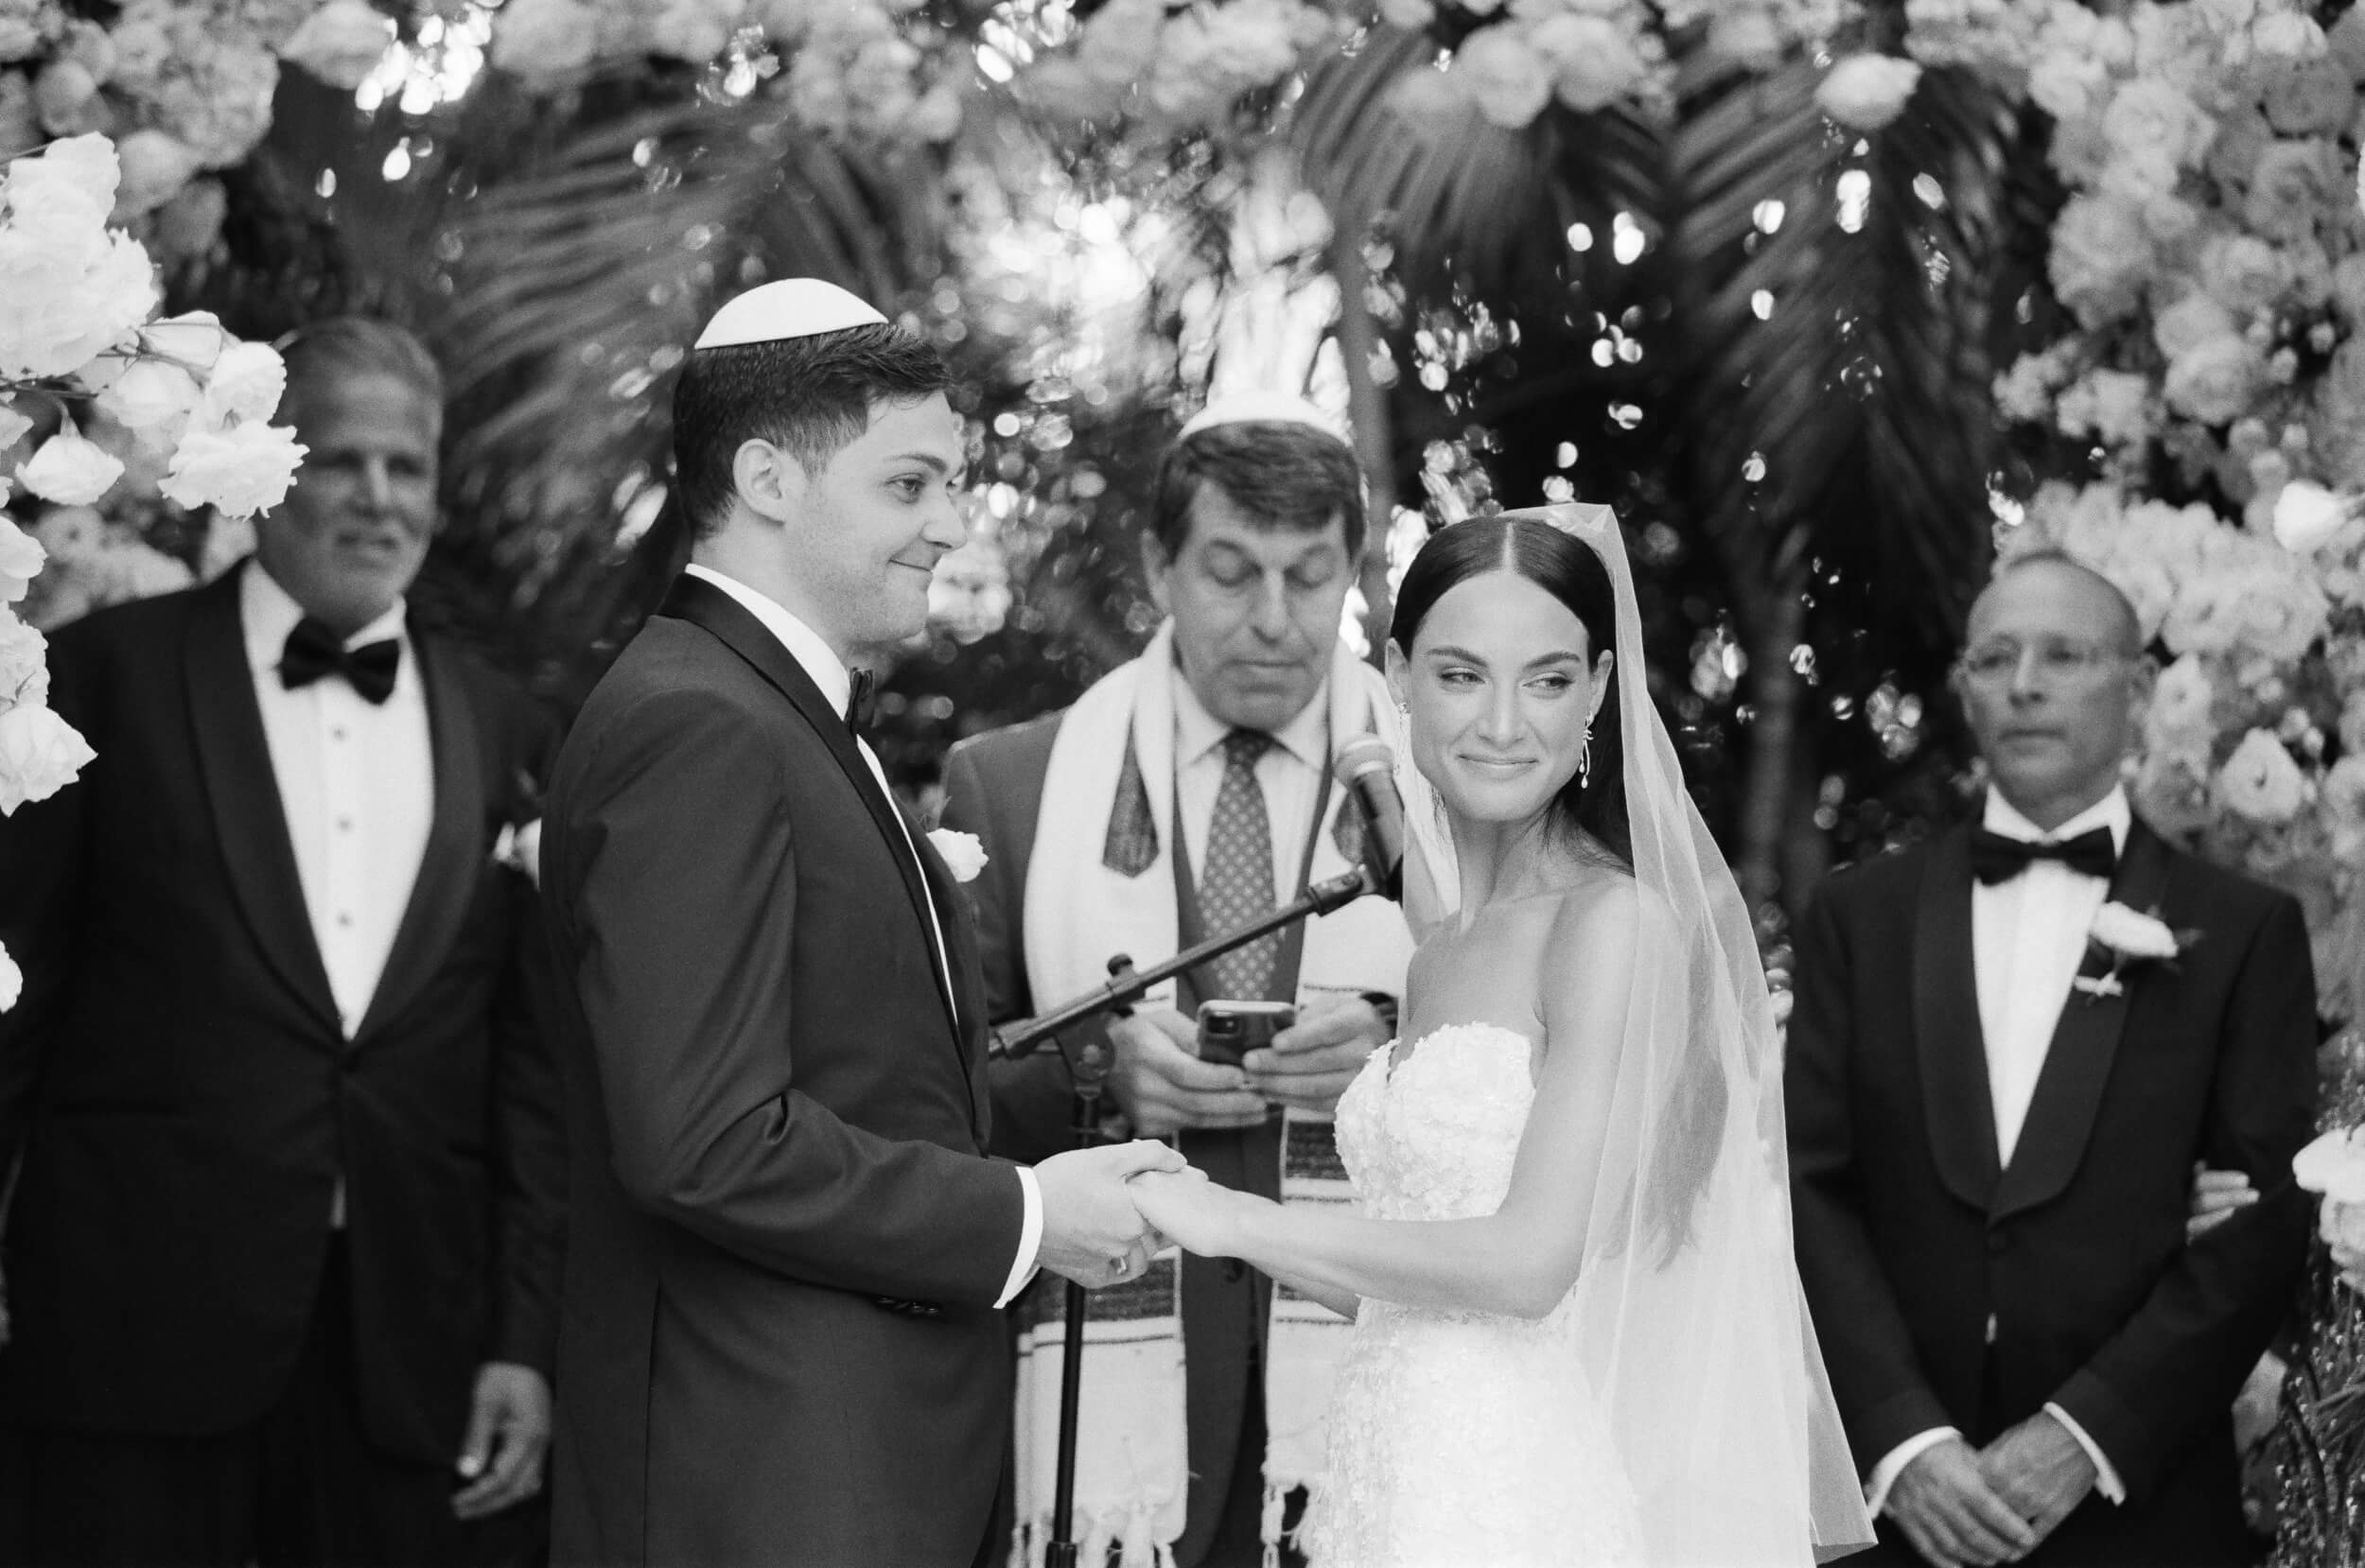 Danielle and Lucas smiling at their guests at the altar